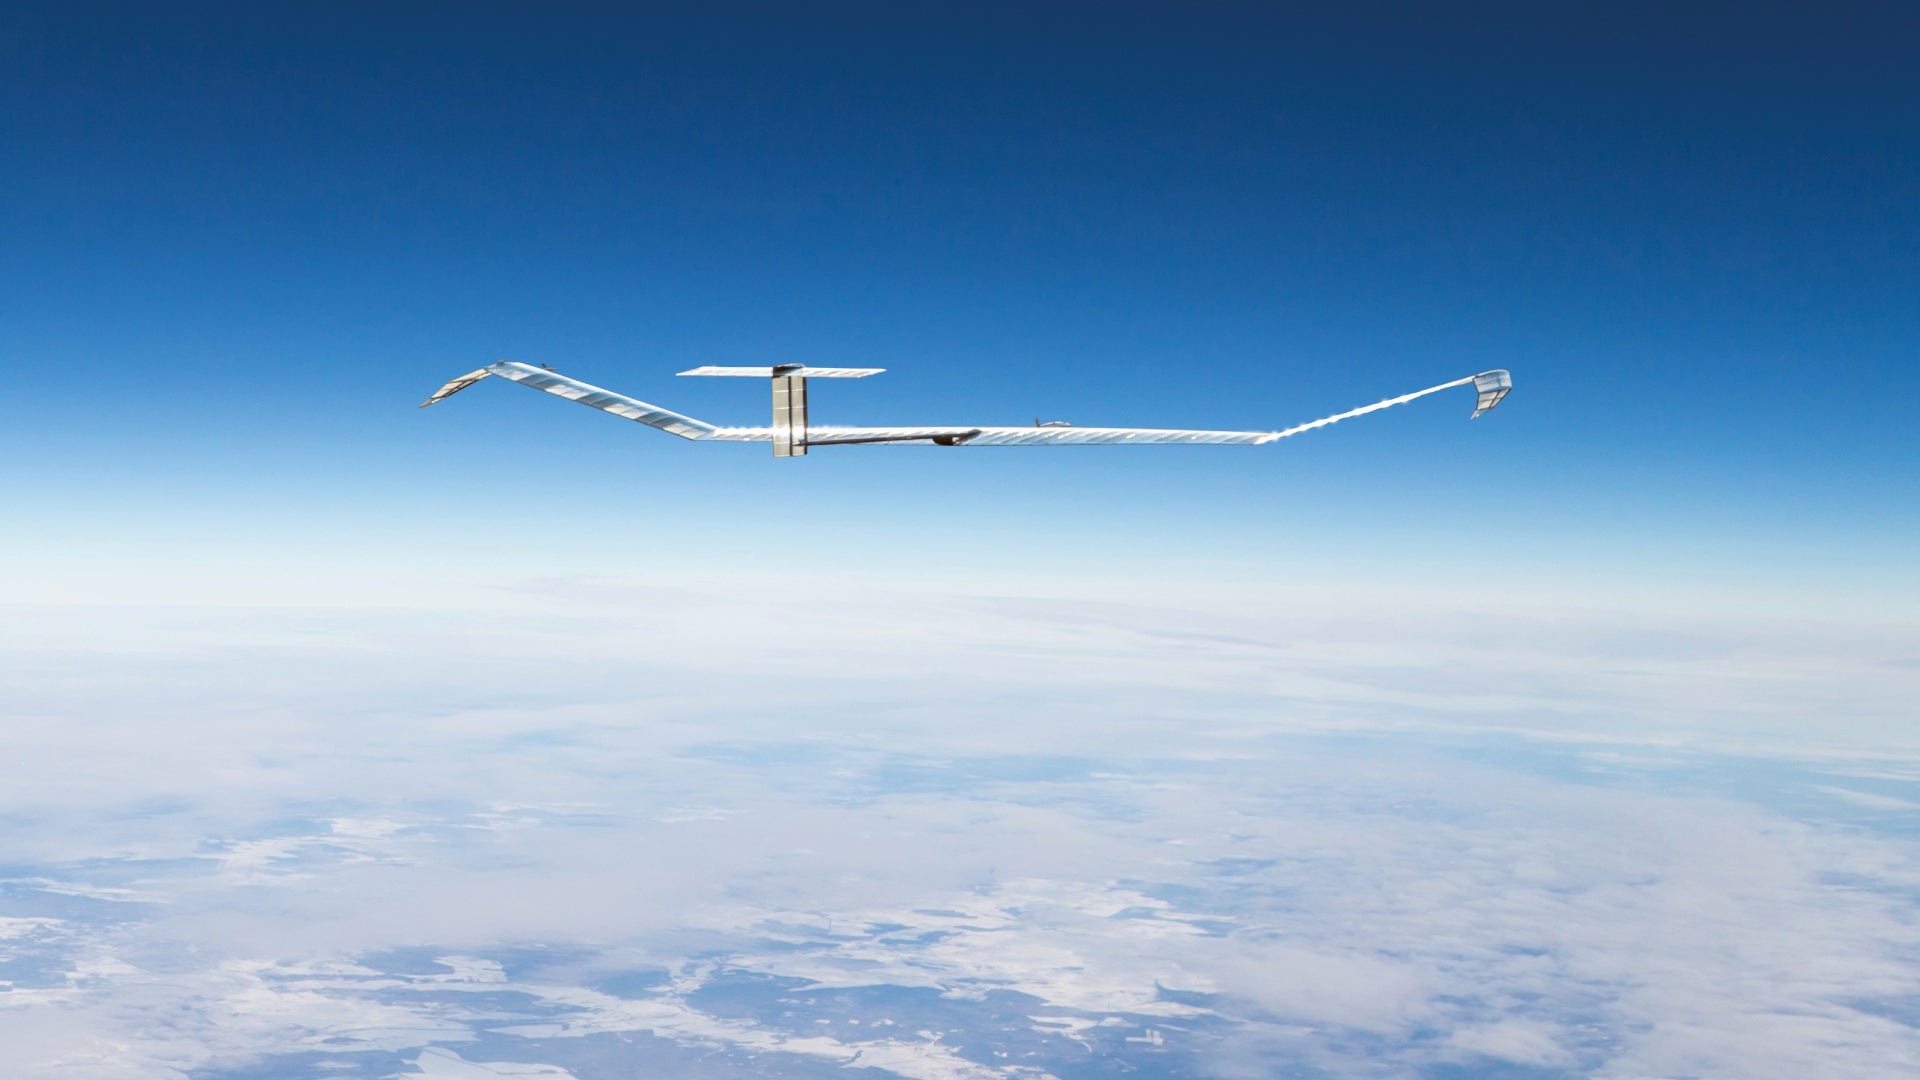 Airbus U.S. Space and Defense Adds New Line of Business in Drones